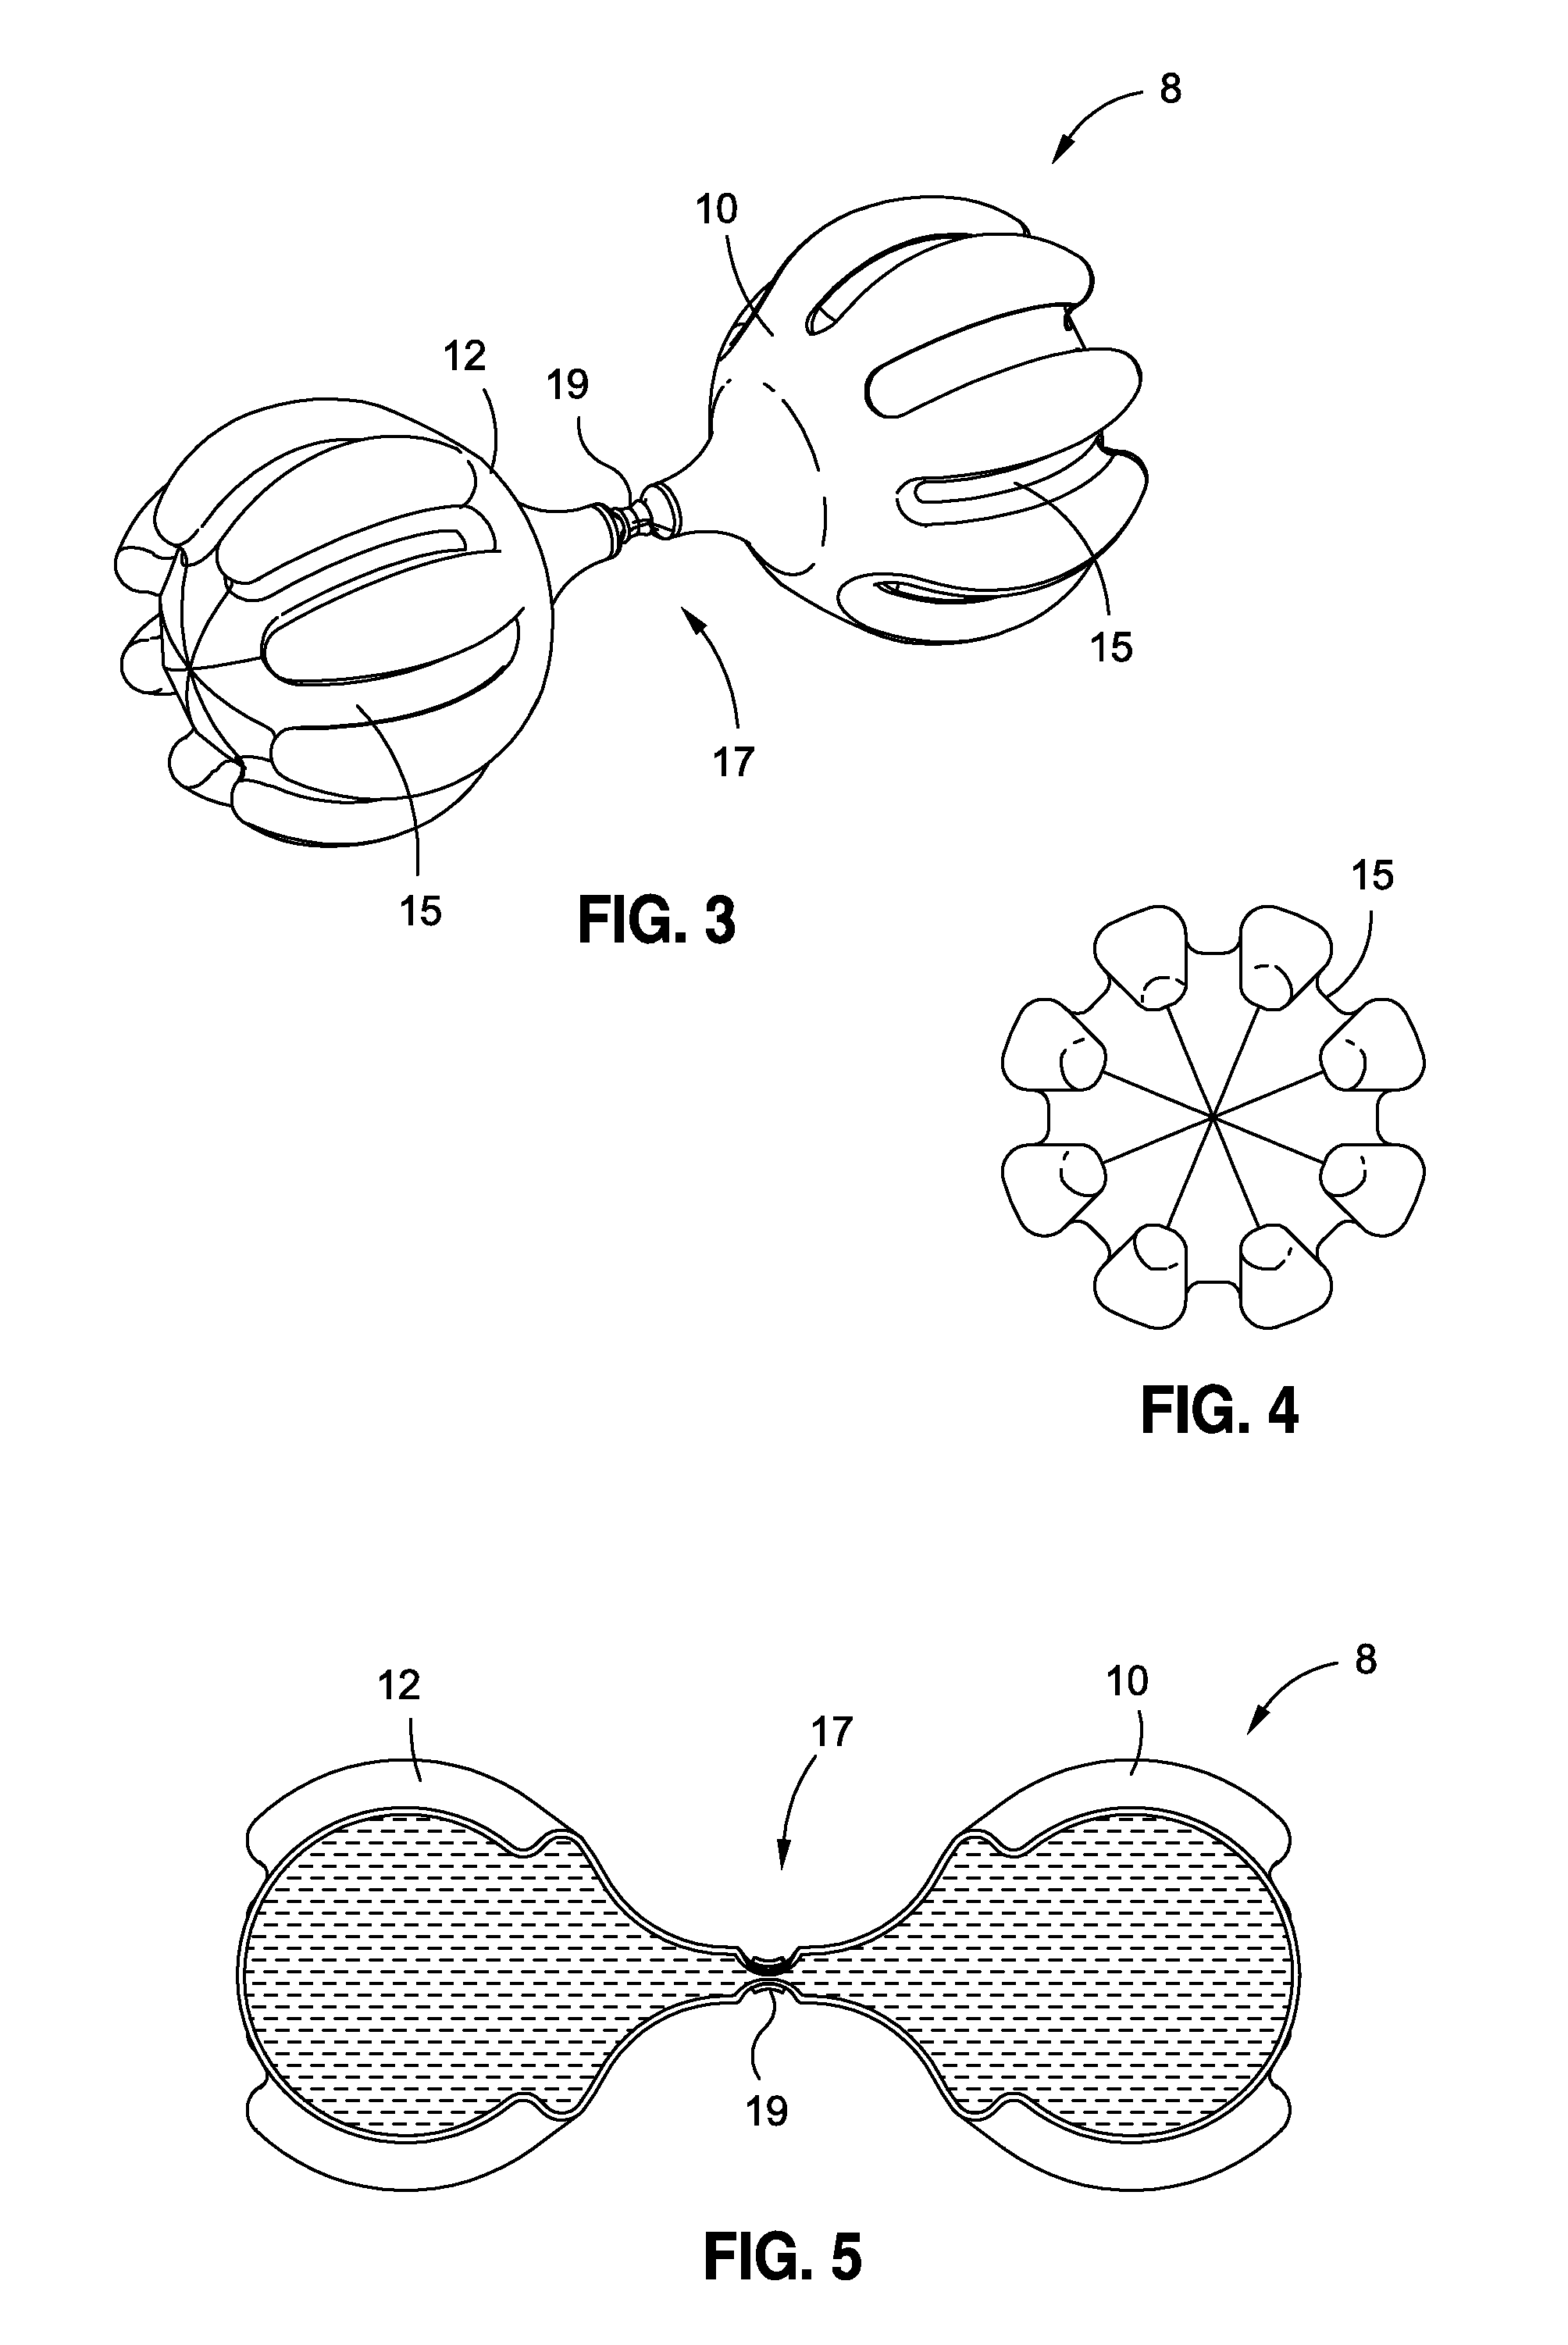 Intragastric implants with multiple fluid chambers